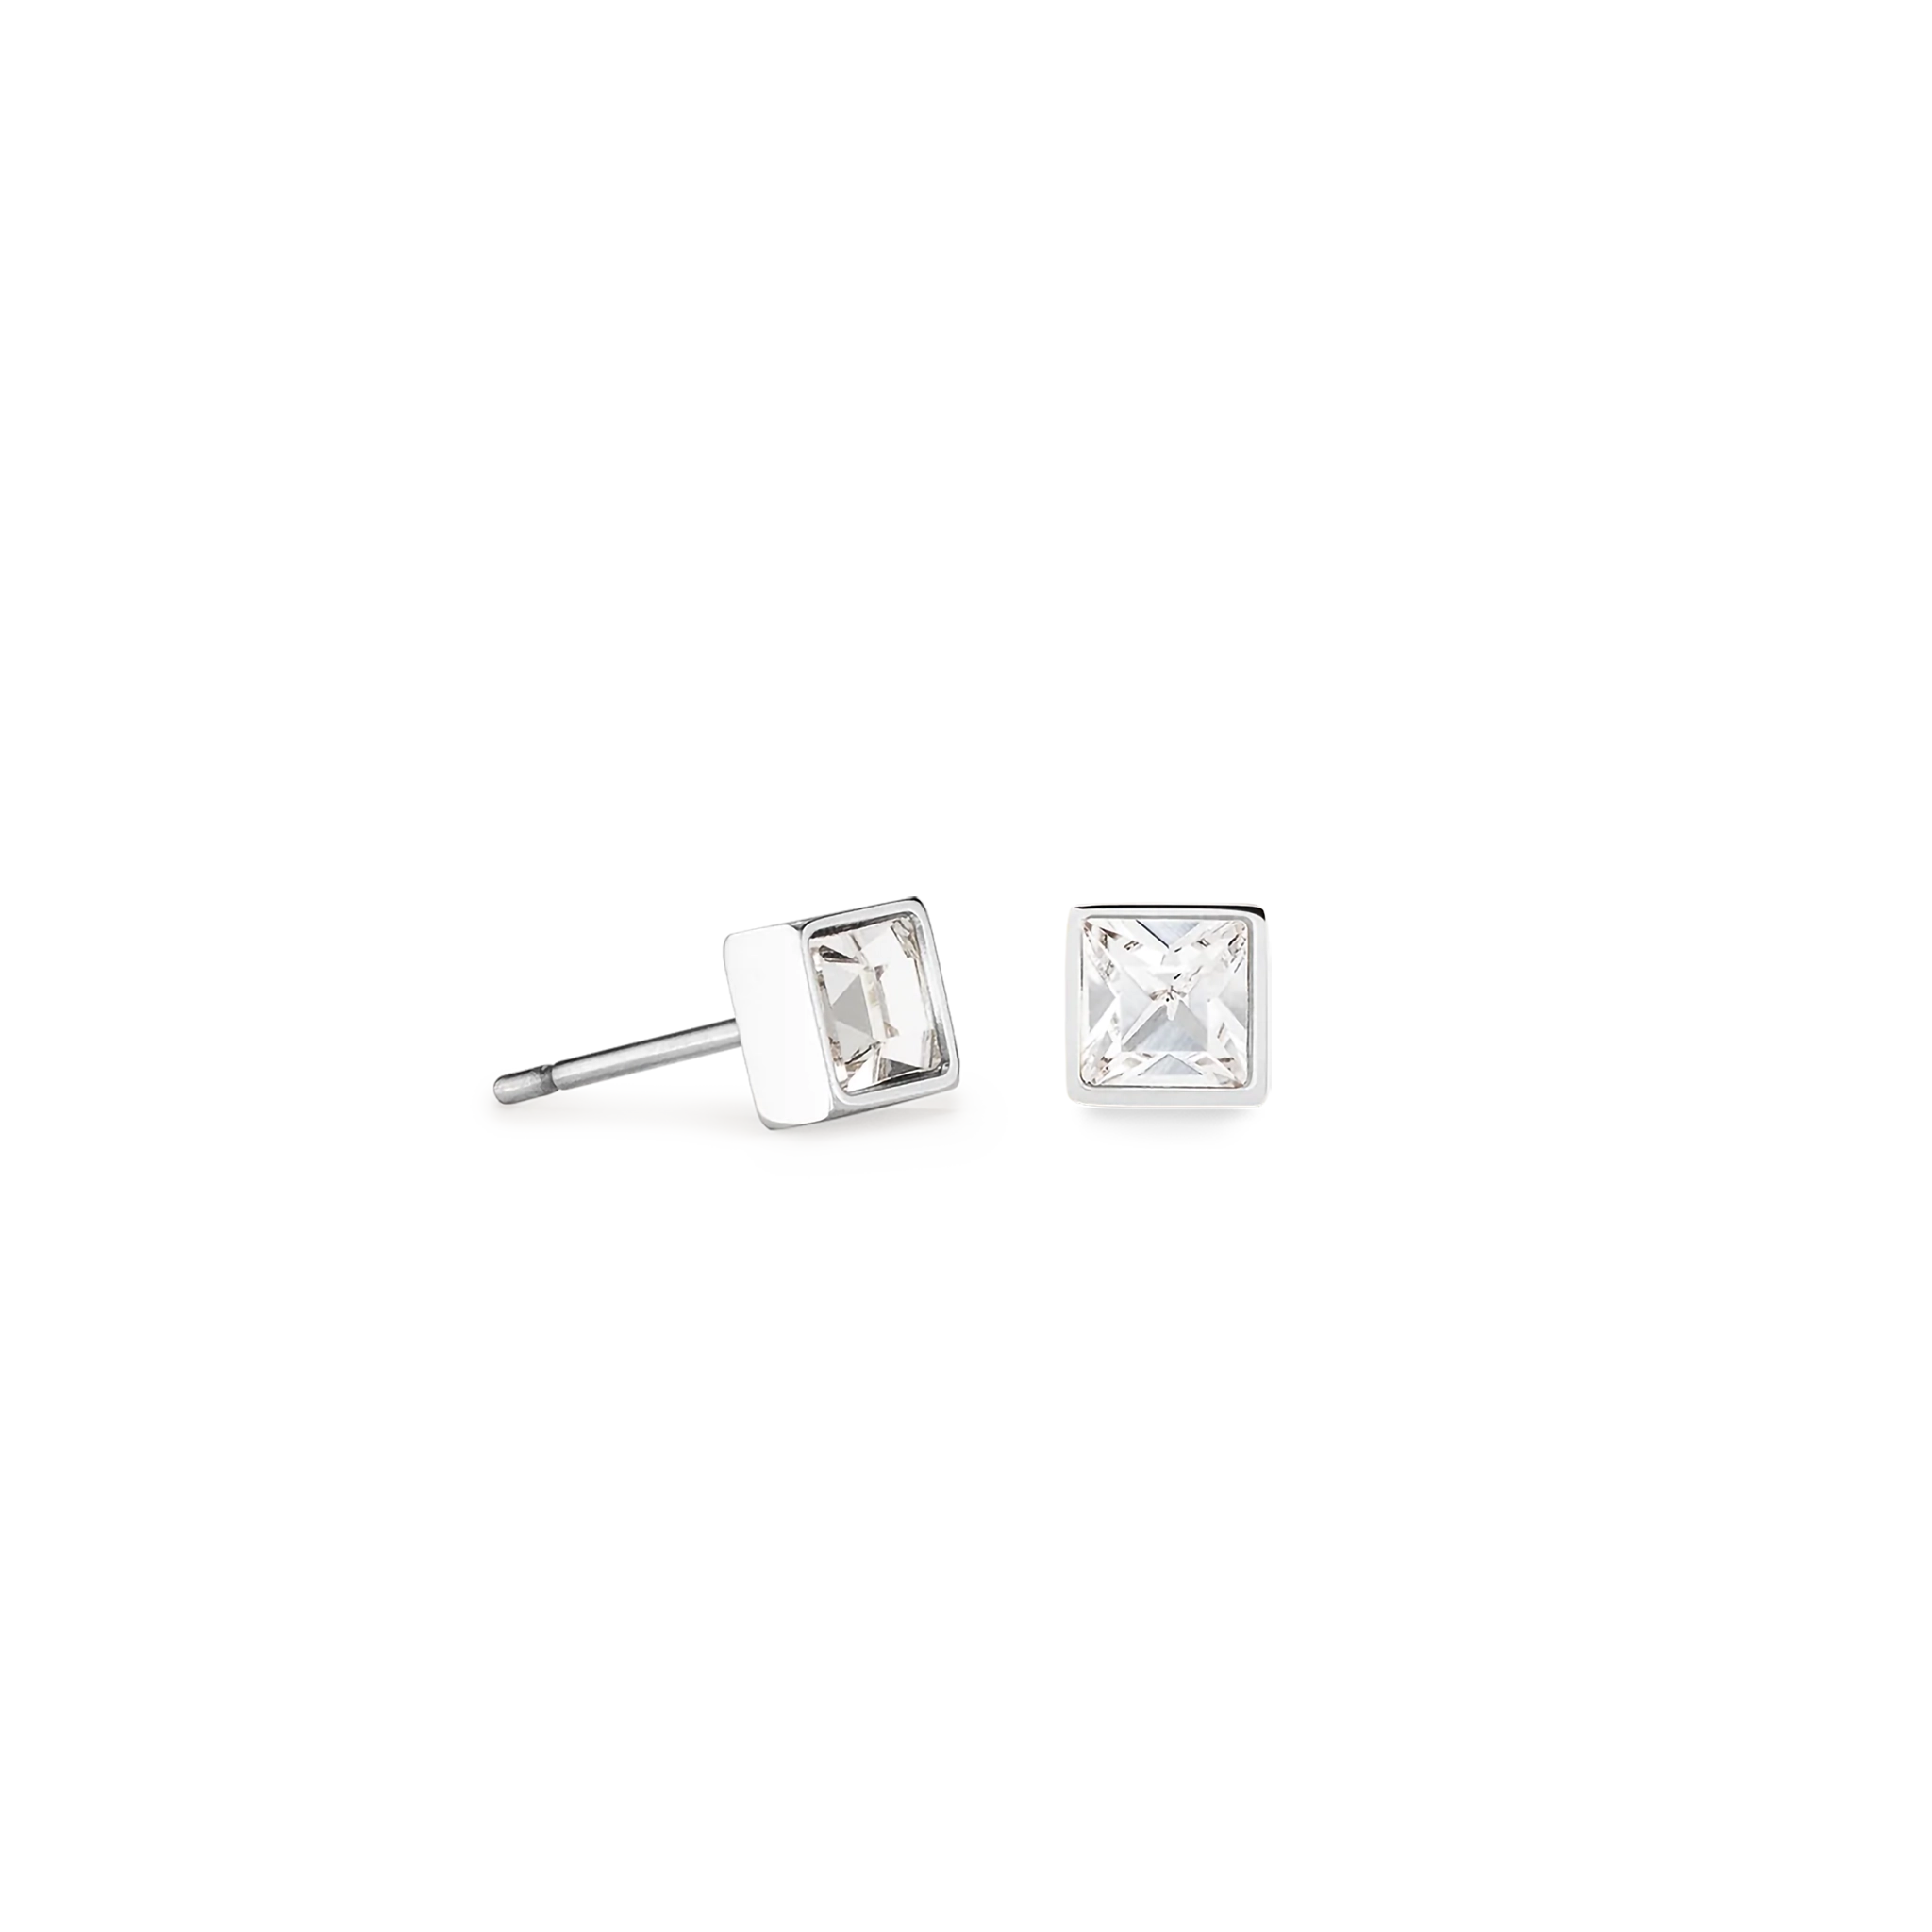 A pair of square steel stud earrings featuring an white crystal stone